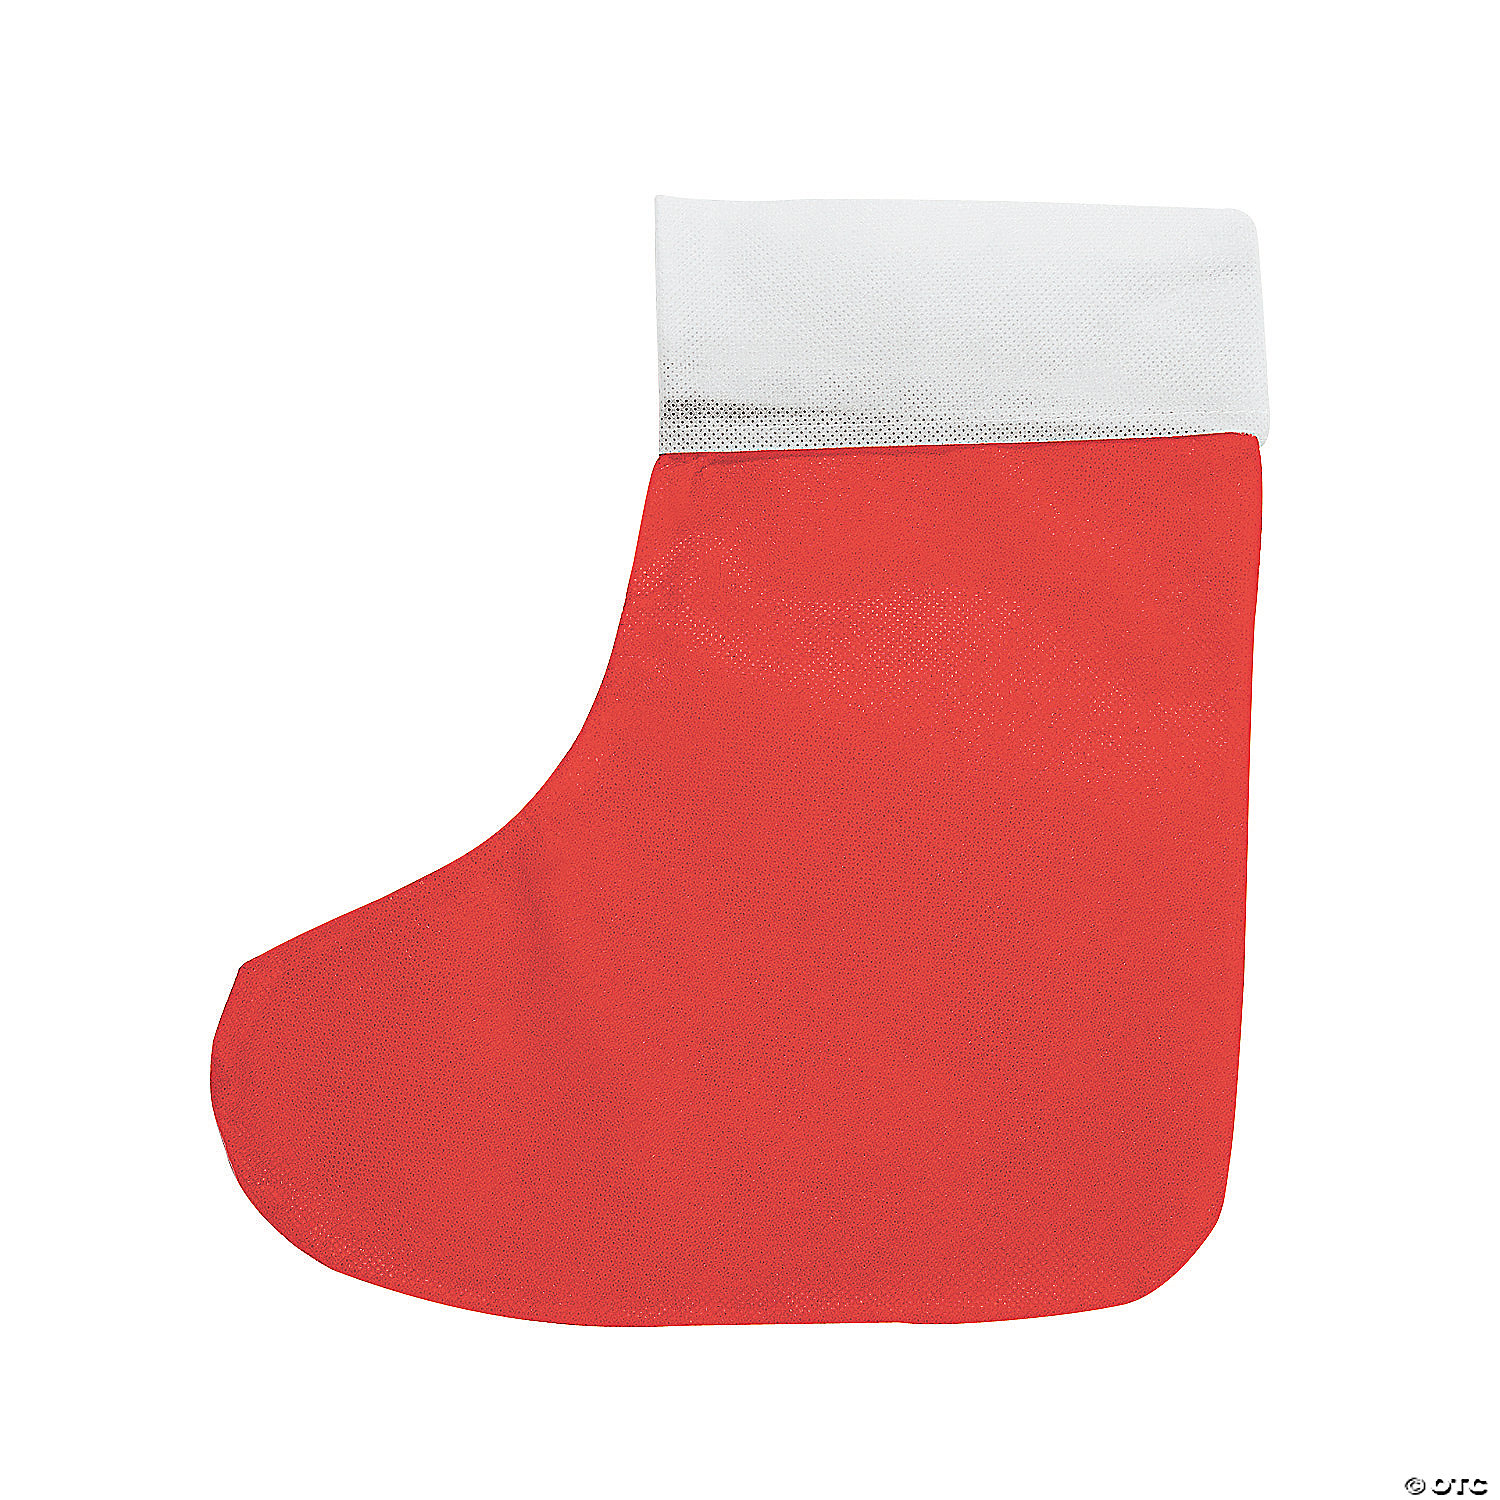 Vintage Red White Felt Christmas Stocking with Holly and Jingle Bells Felt Stocking Christmas Stocking Christmas Stocking Jingle Bells